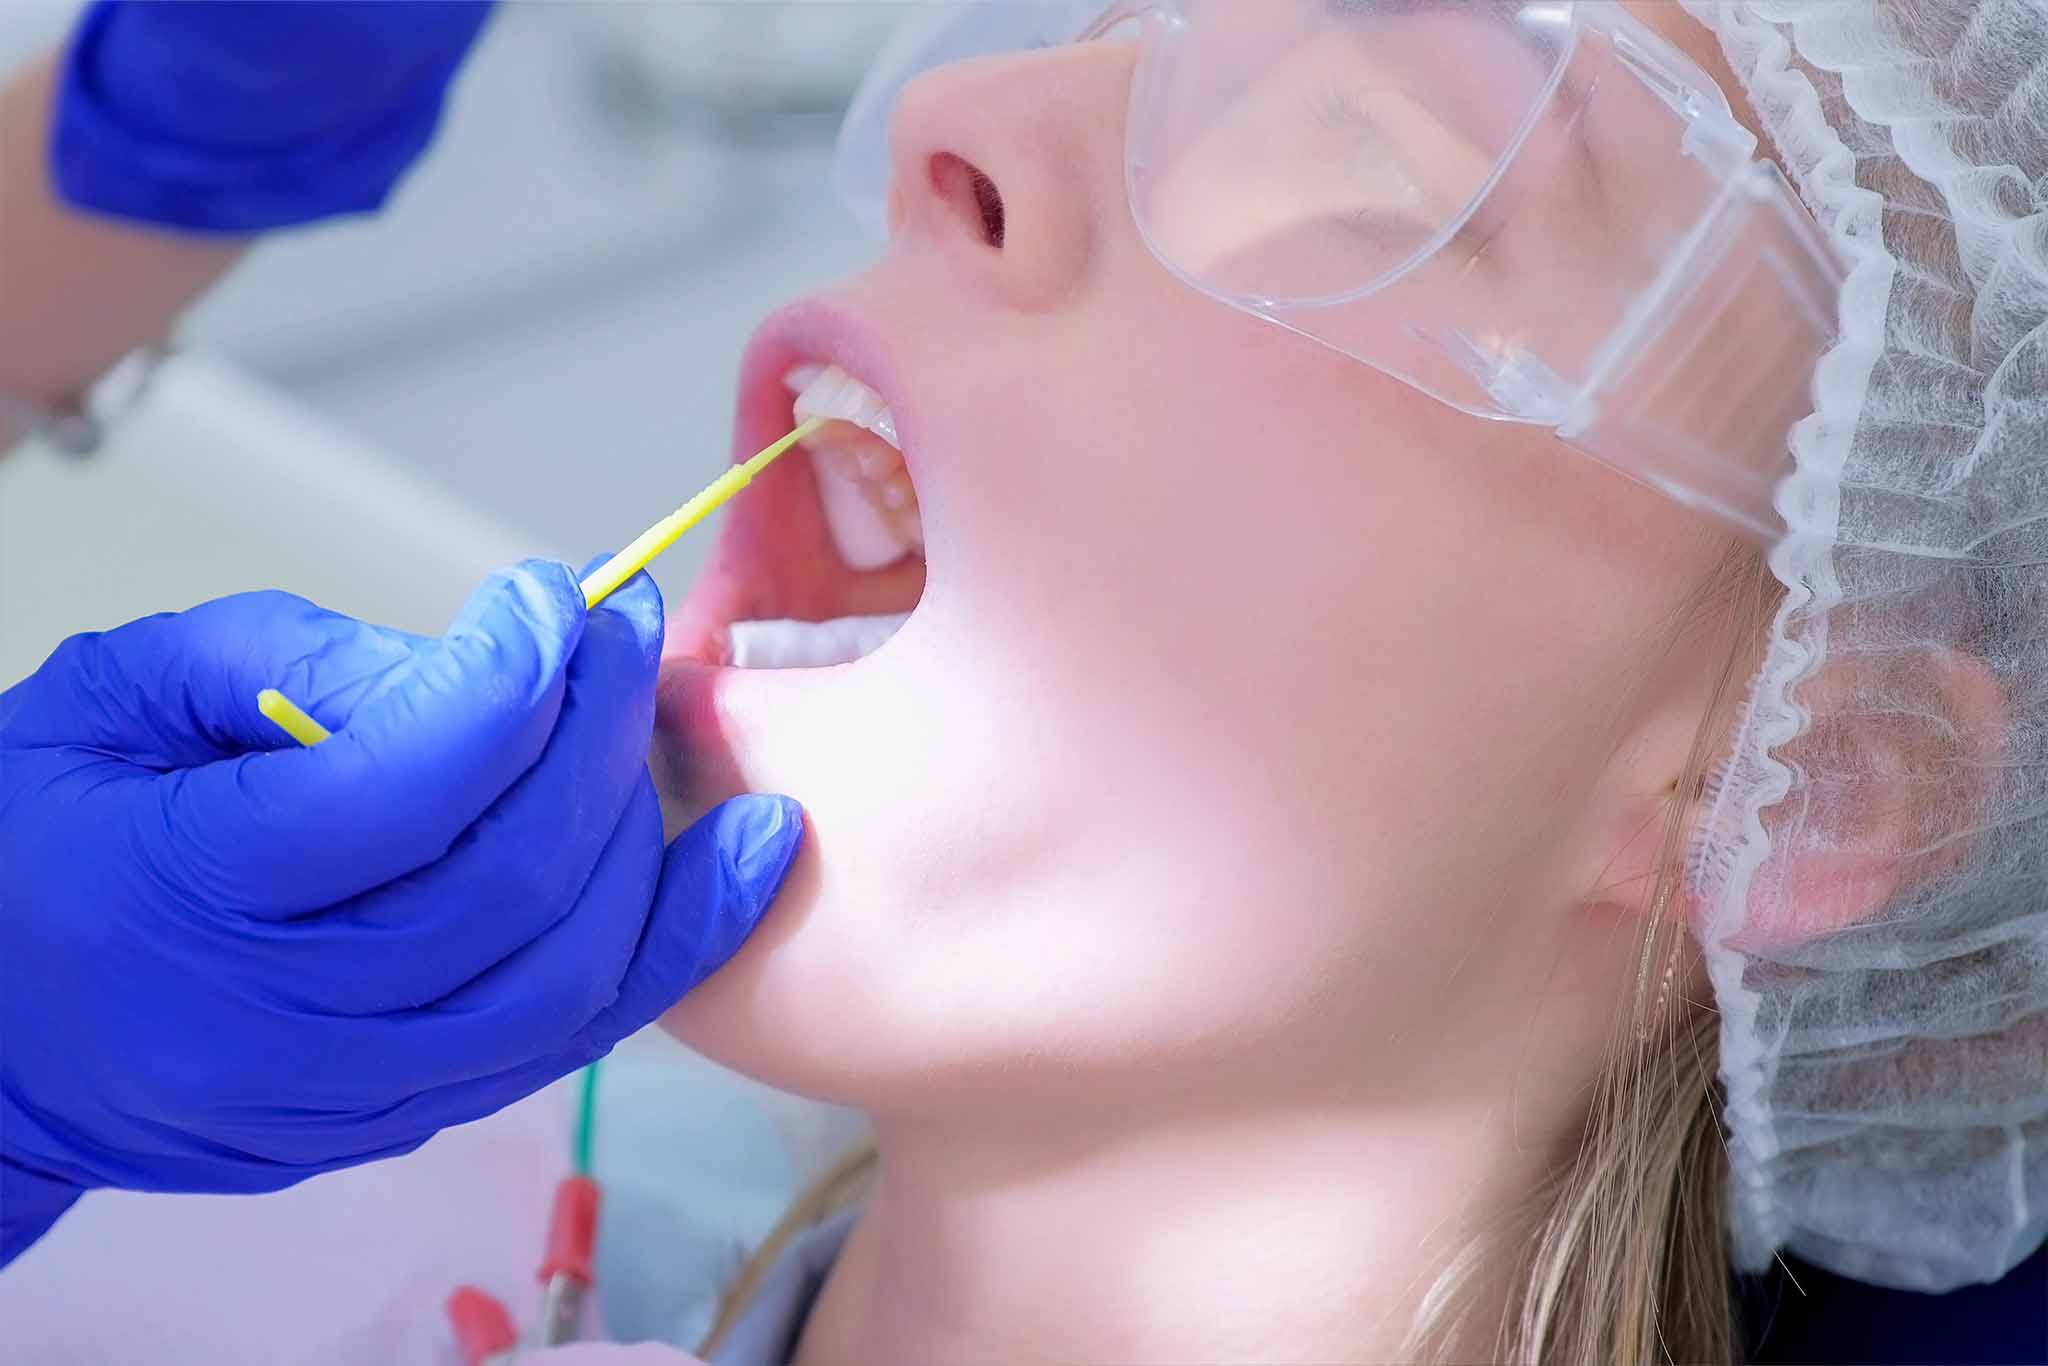 A patient is getting a fluoride treatment at the dentist.